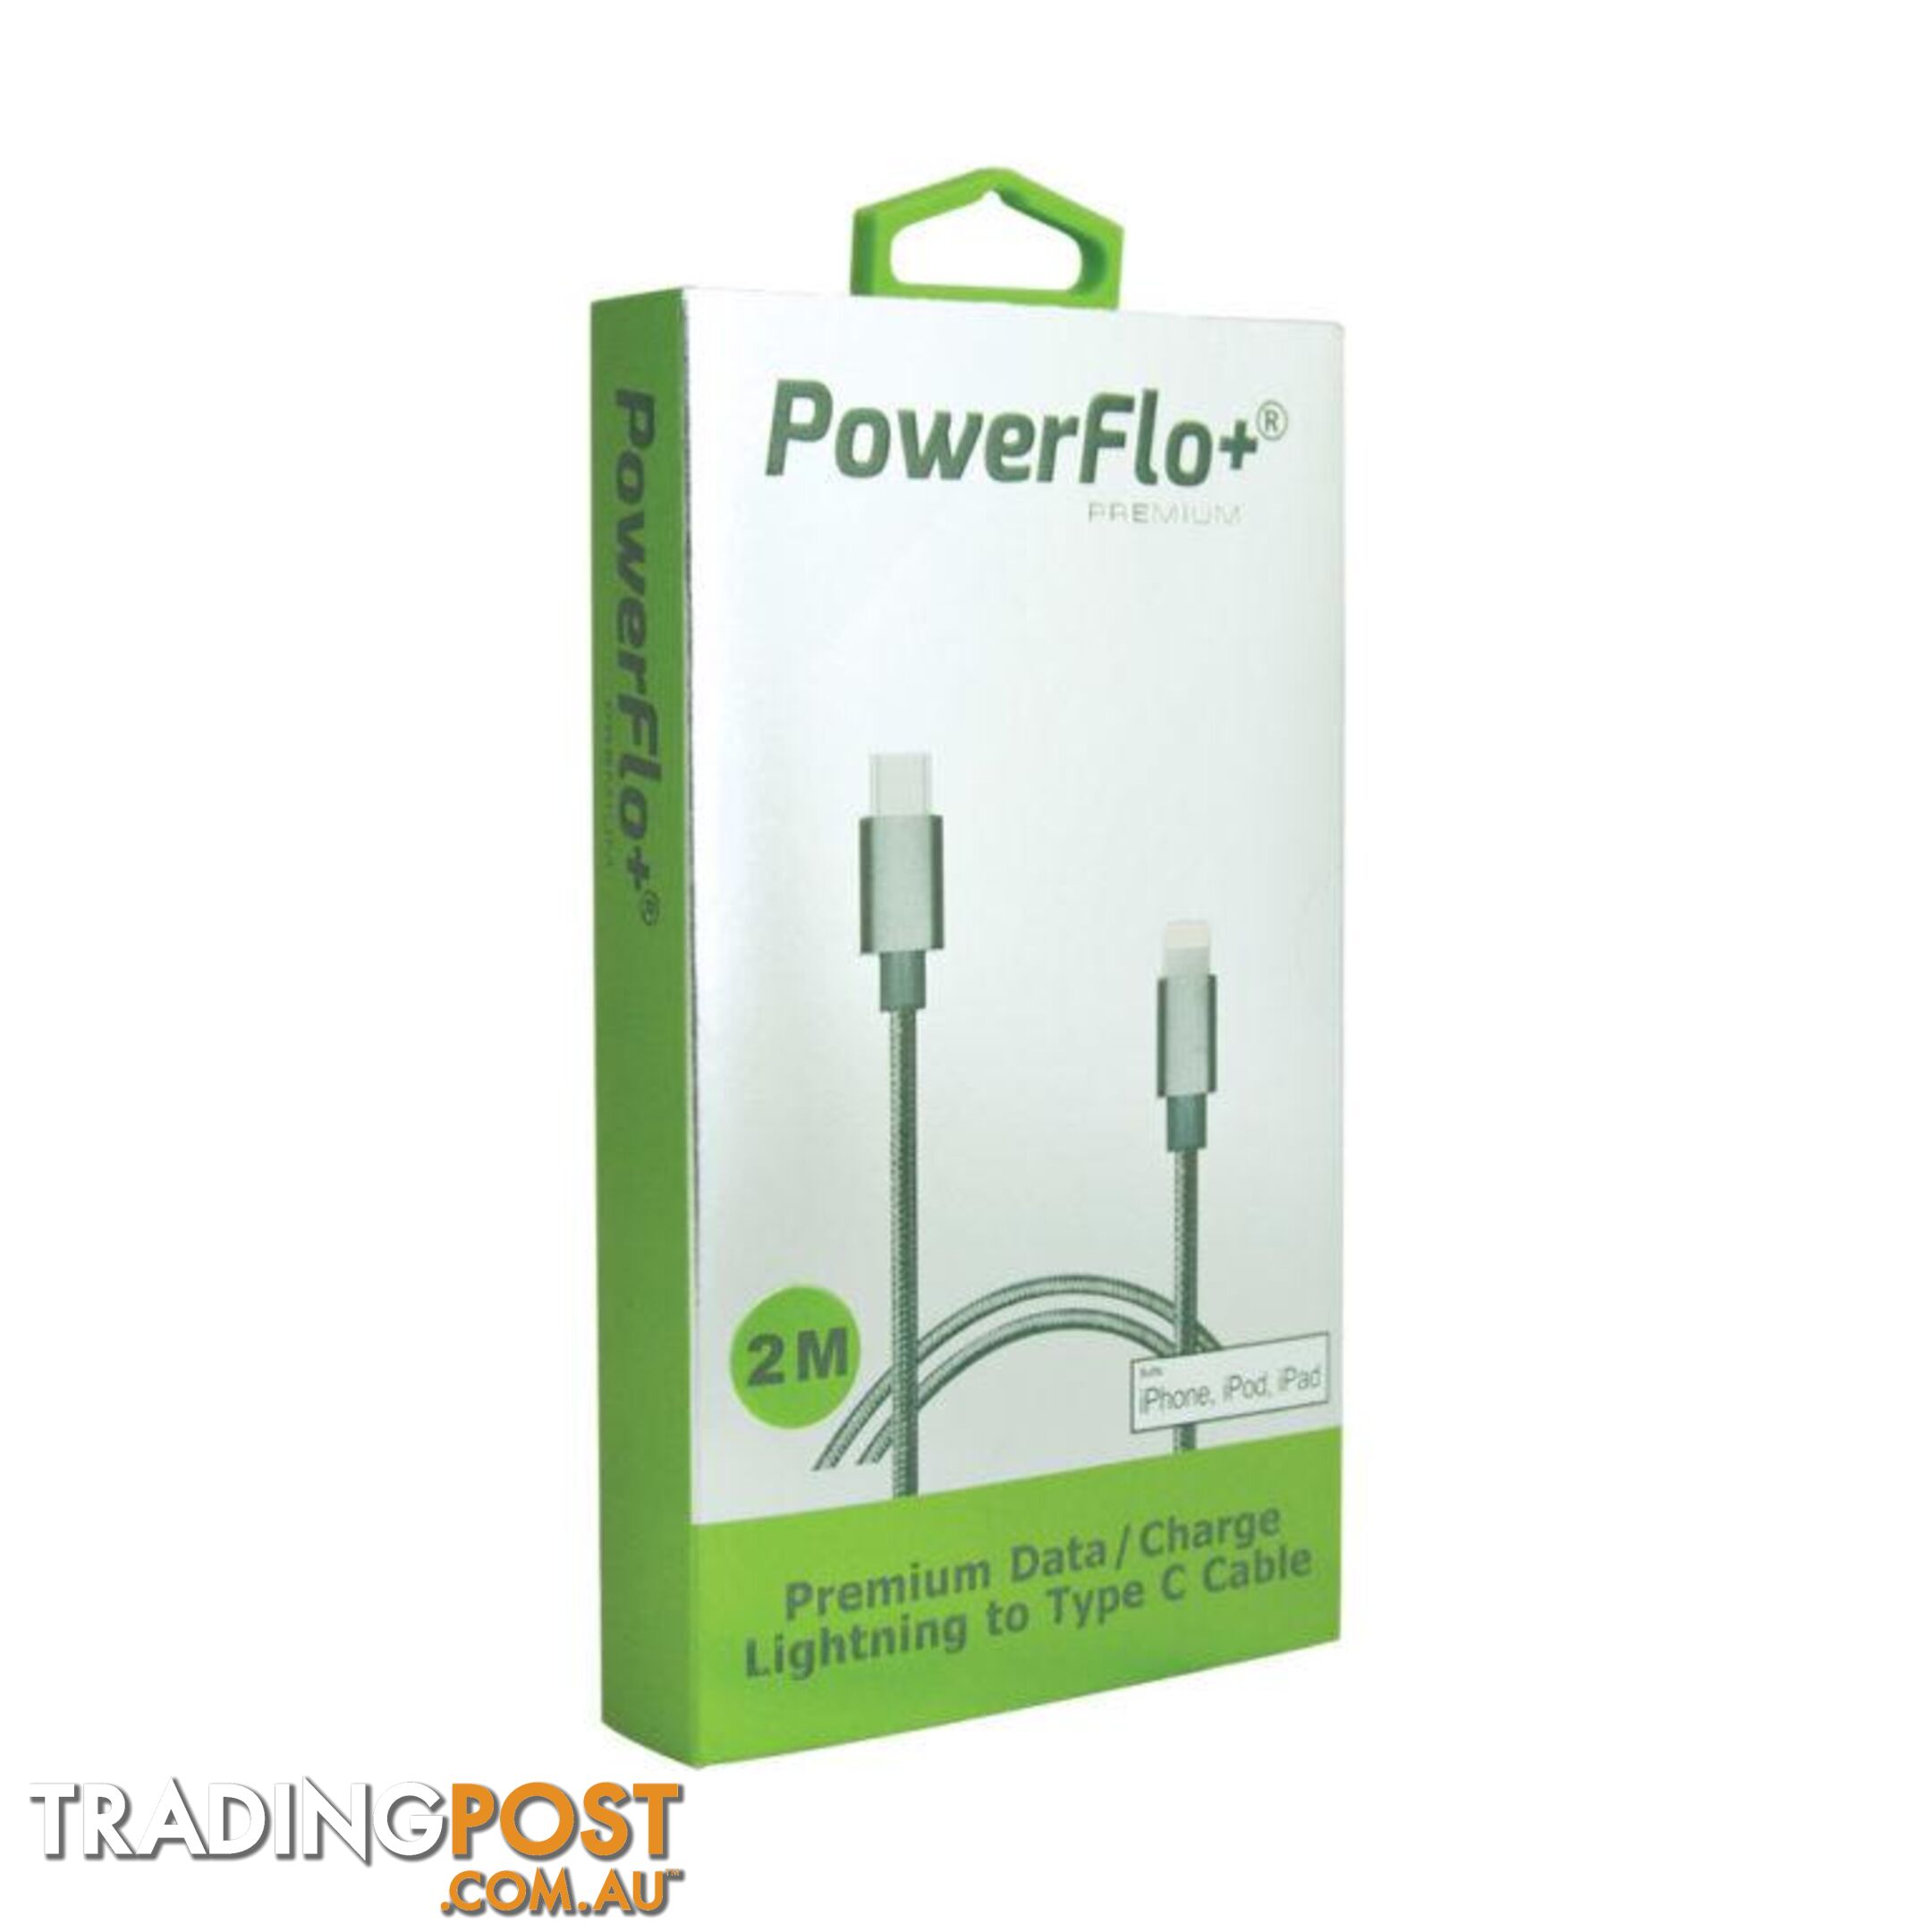 Powerflo+ Rev. Type-C Data/Sync Cable - 1001071 - Cables